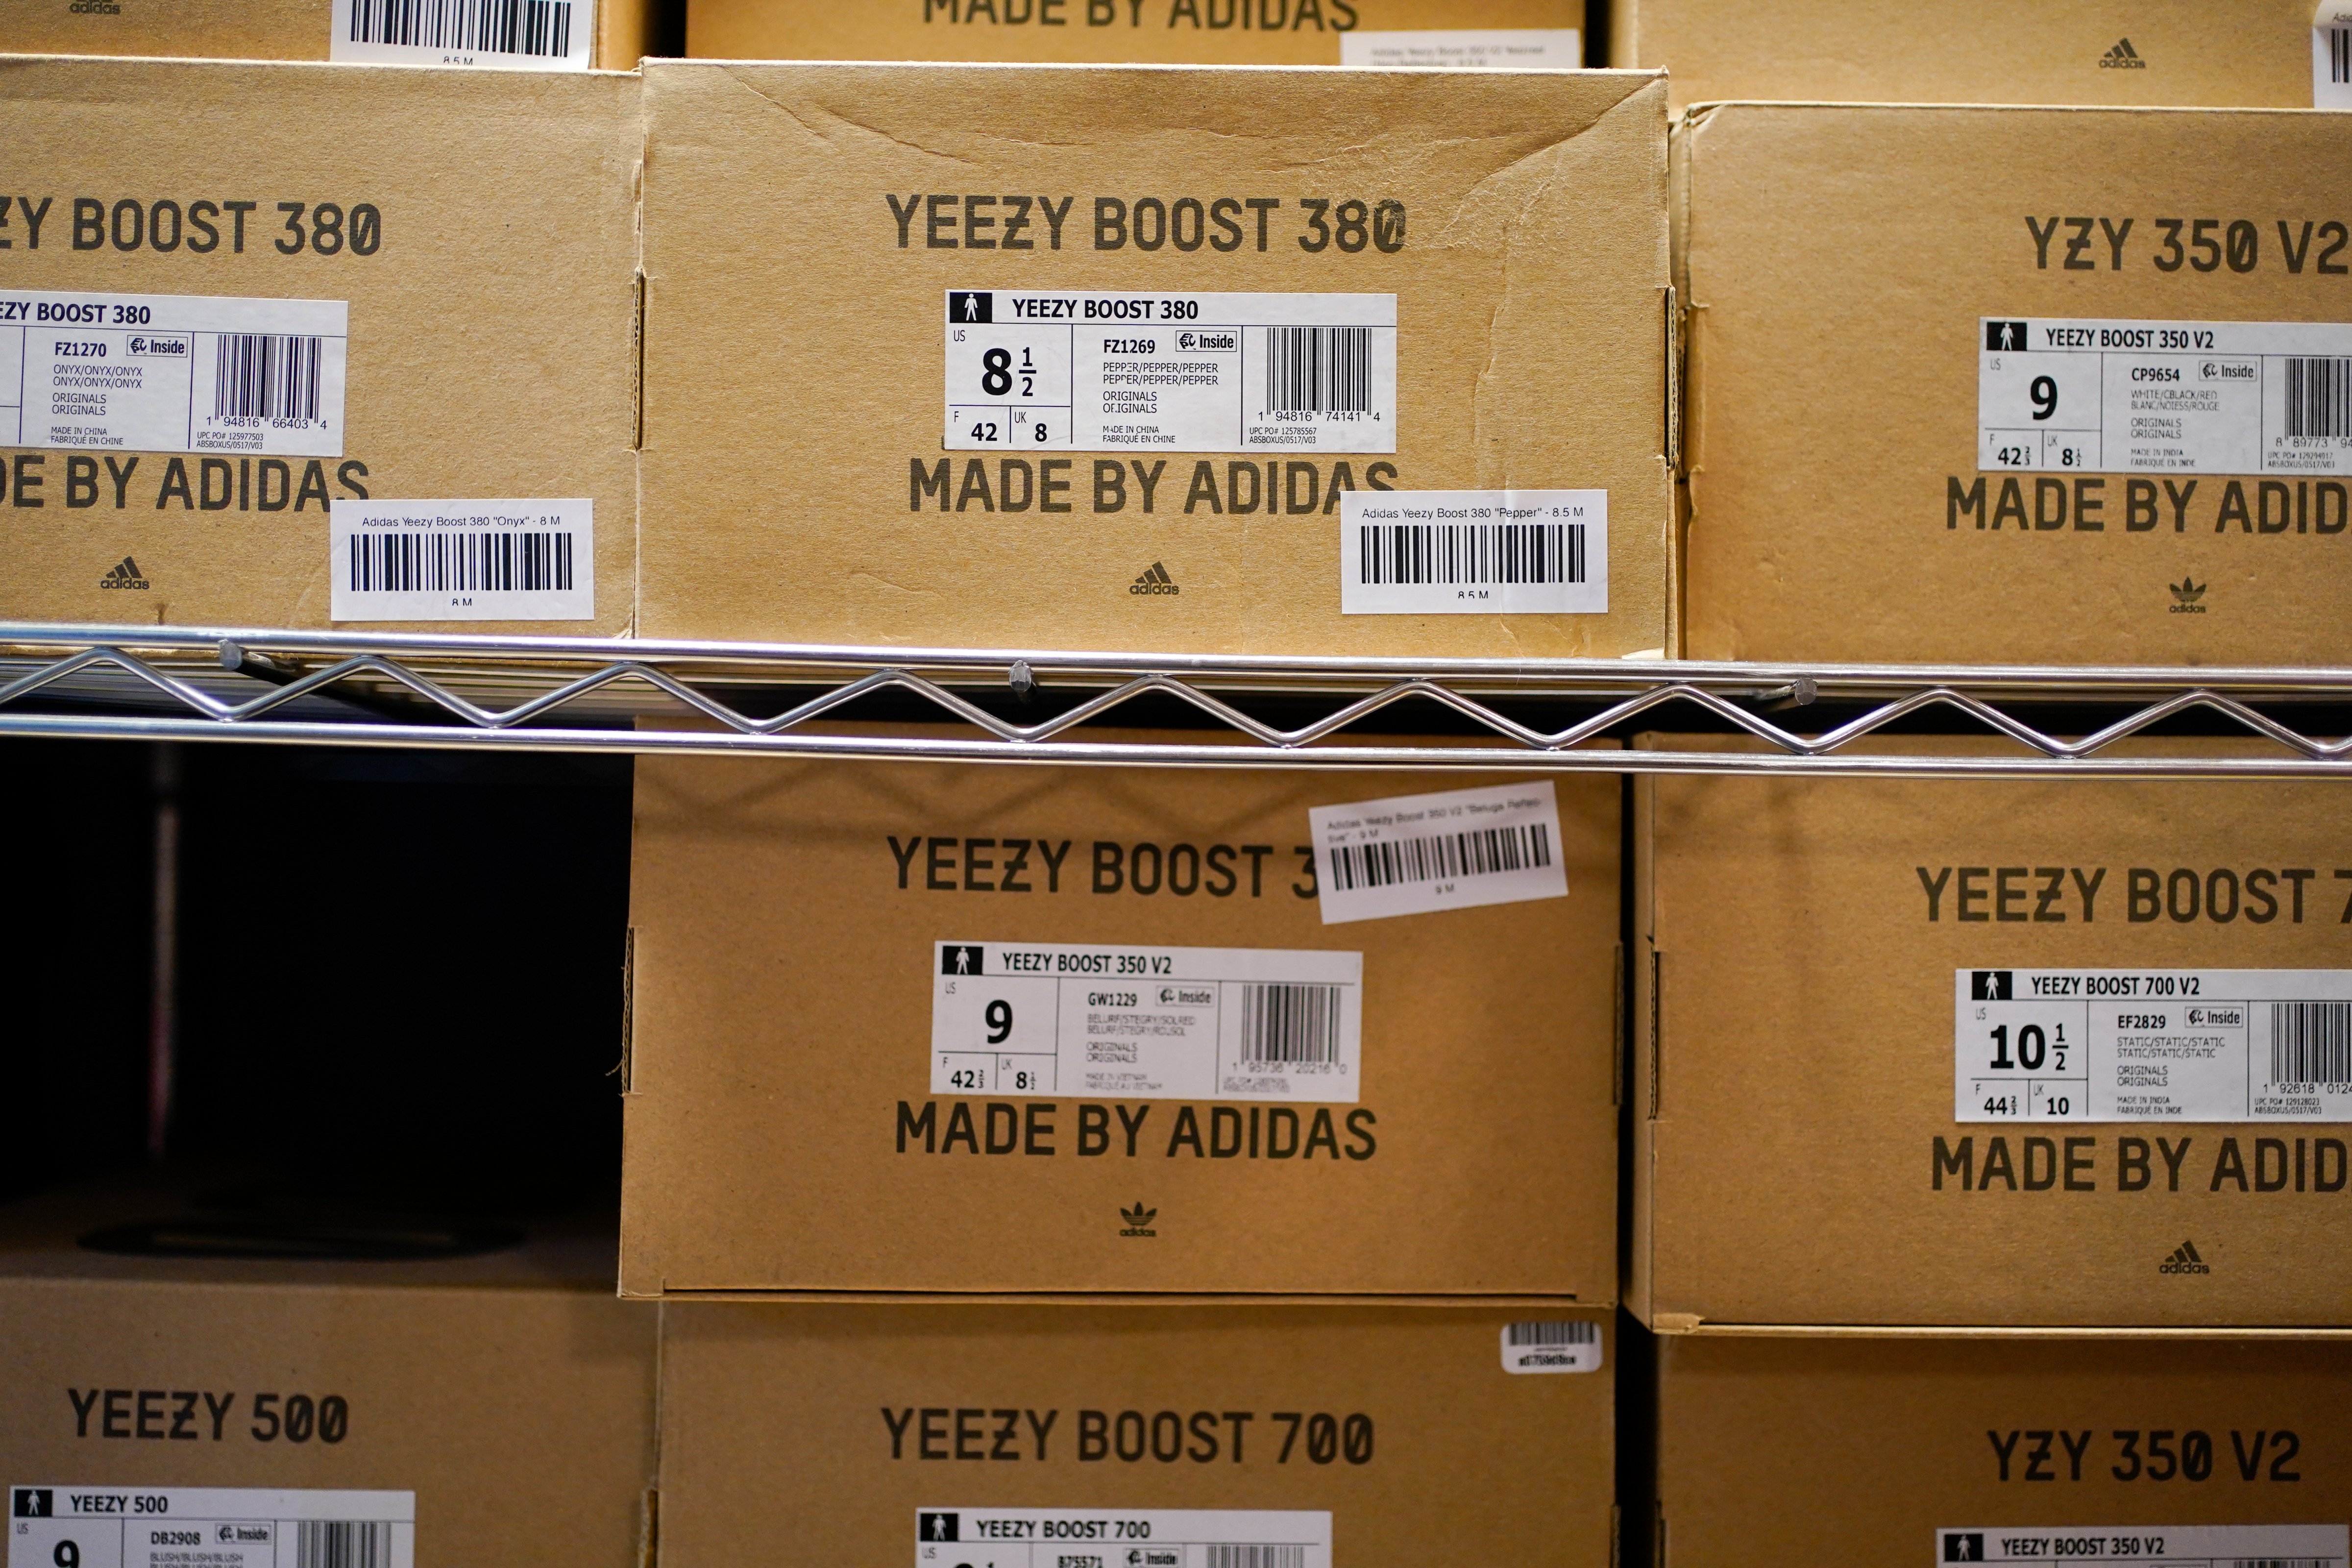 Boxes containing Yeezy shoes made by Adidas are seen at a sneaker store in New Jersey in October 2022. (Seth Wenig—AP)